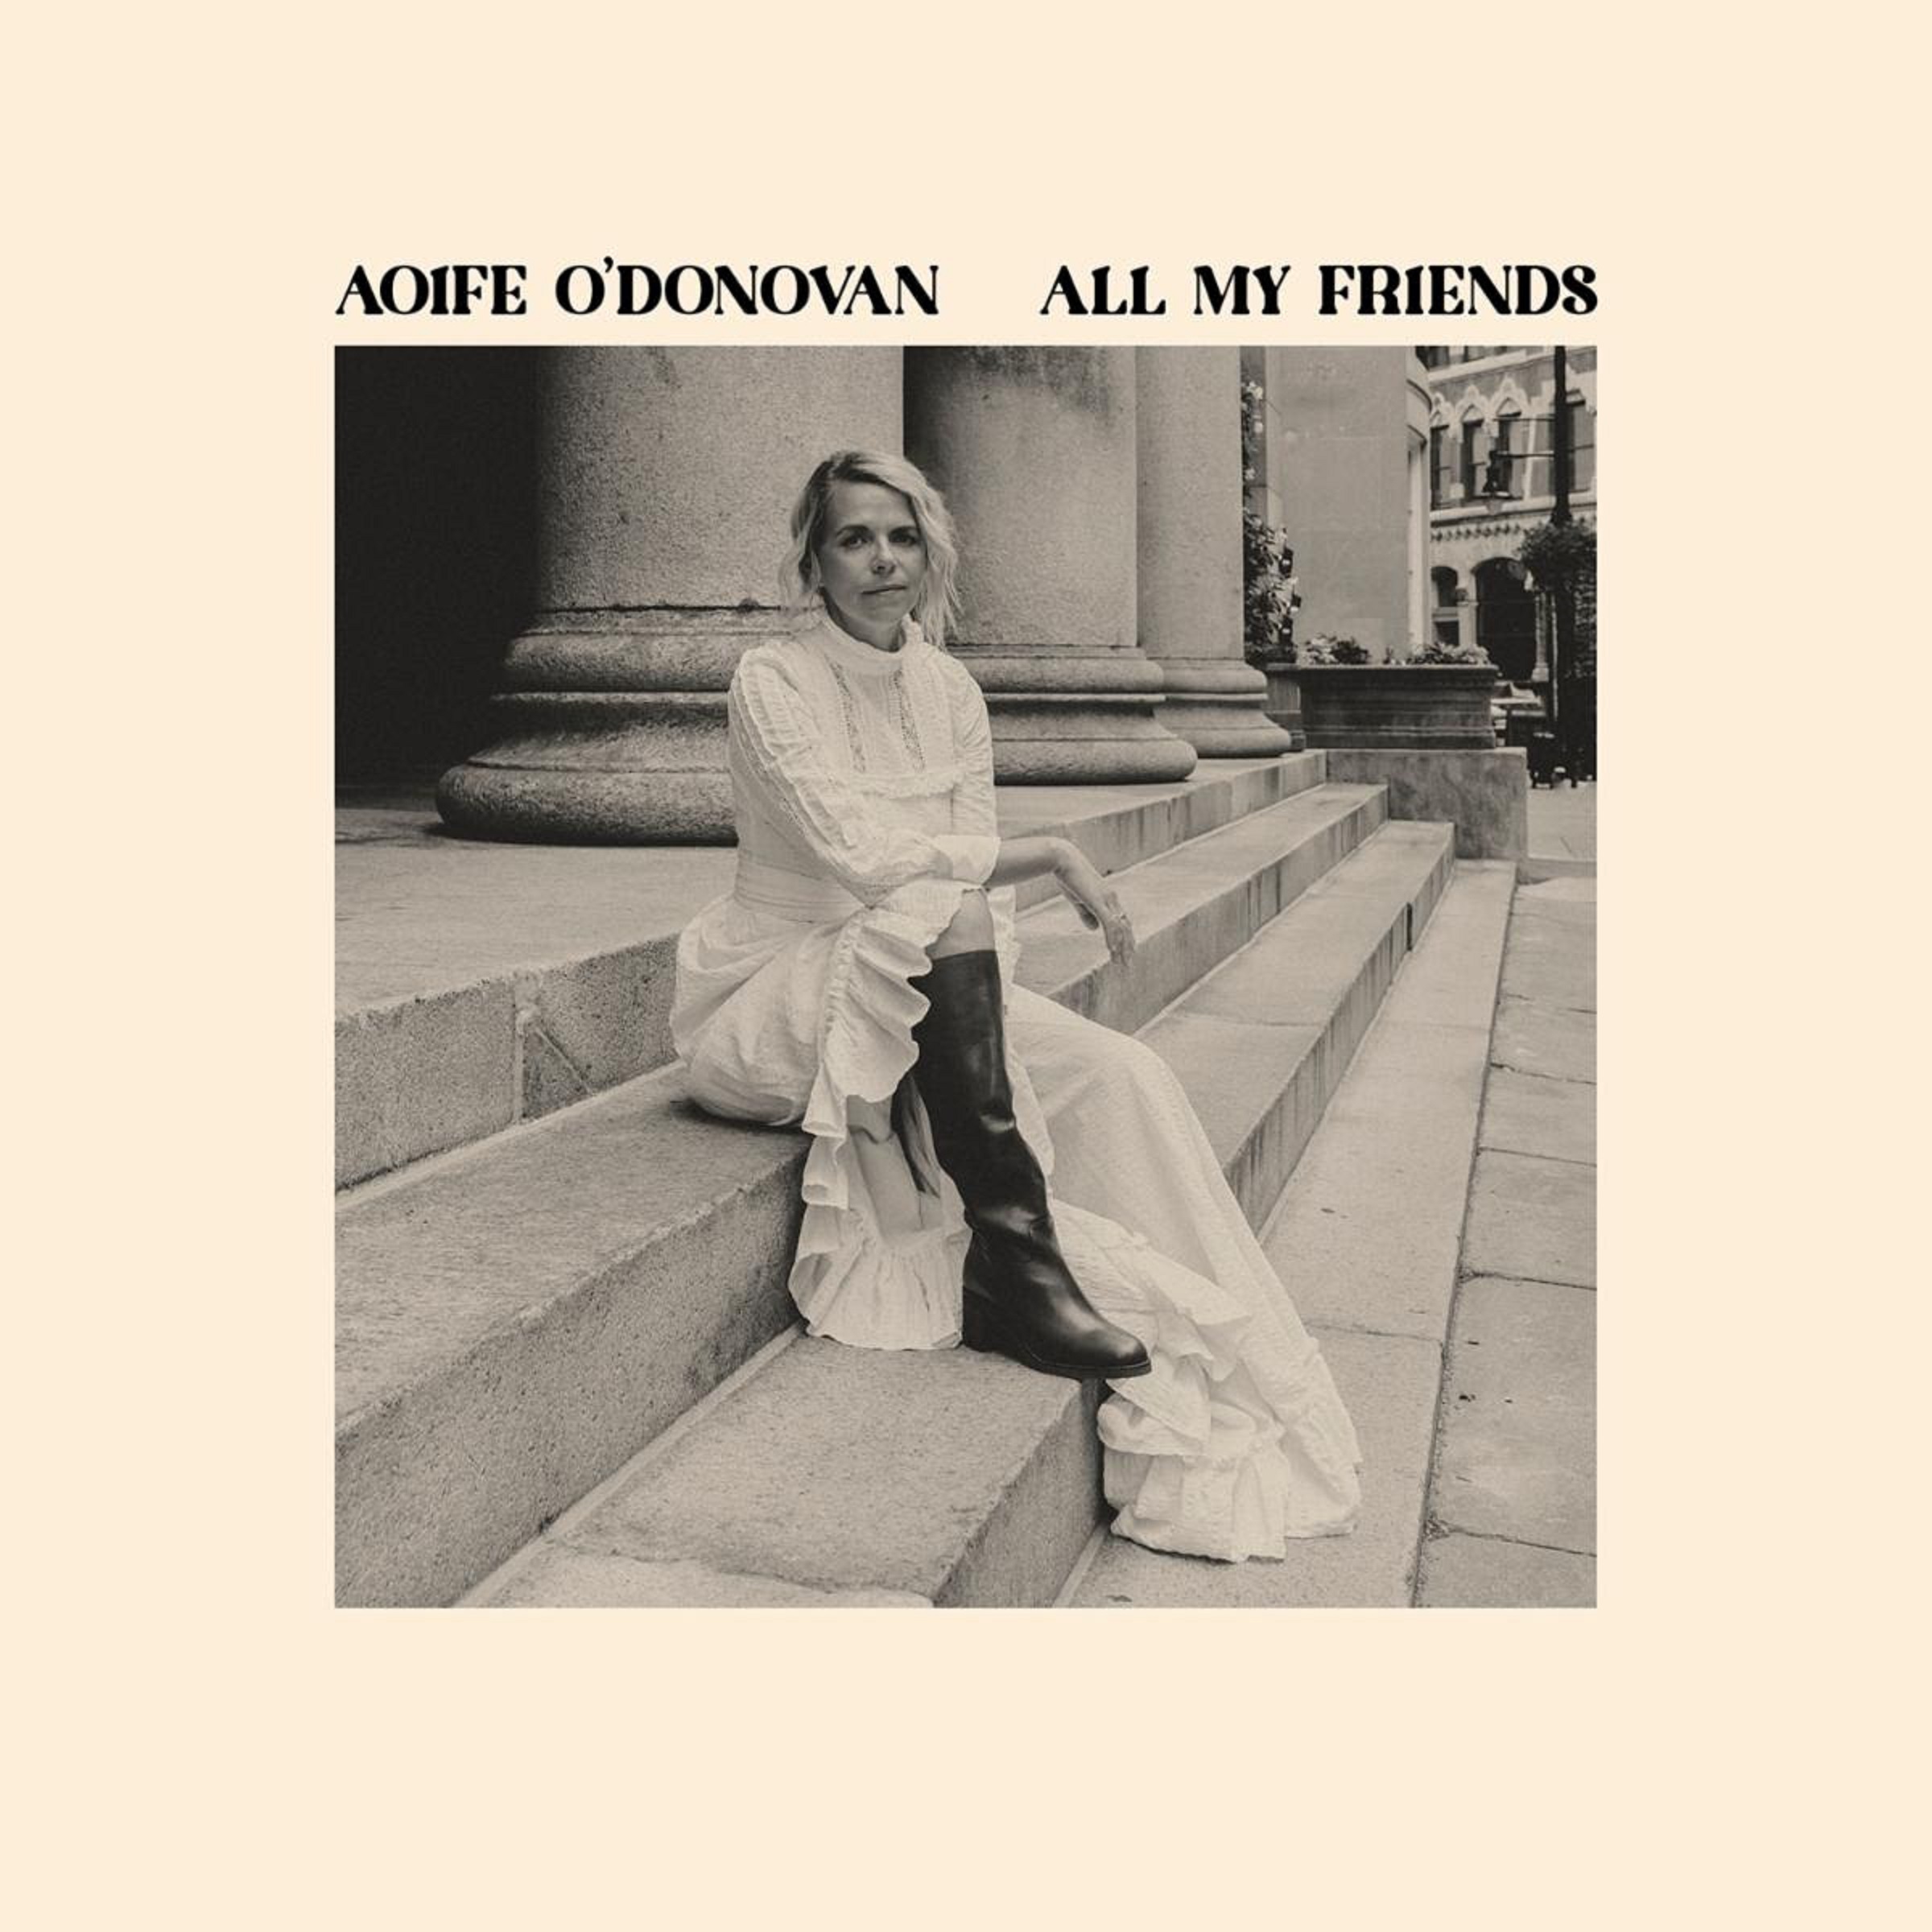 Aoife O’Donovan Celebrates Democracy and Womanhood on New Solo Album ‘All My Friends’